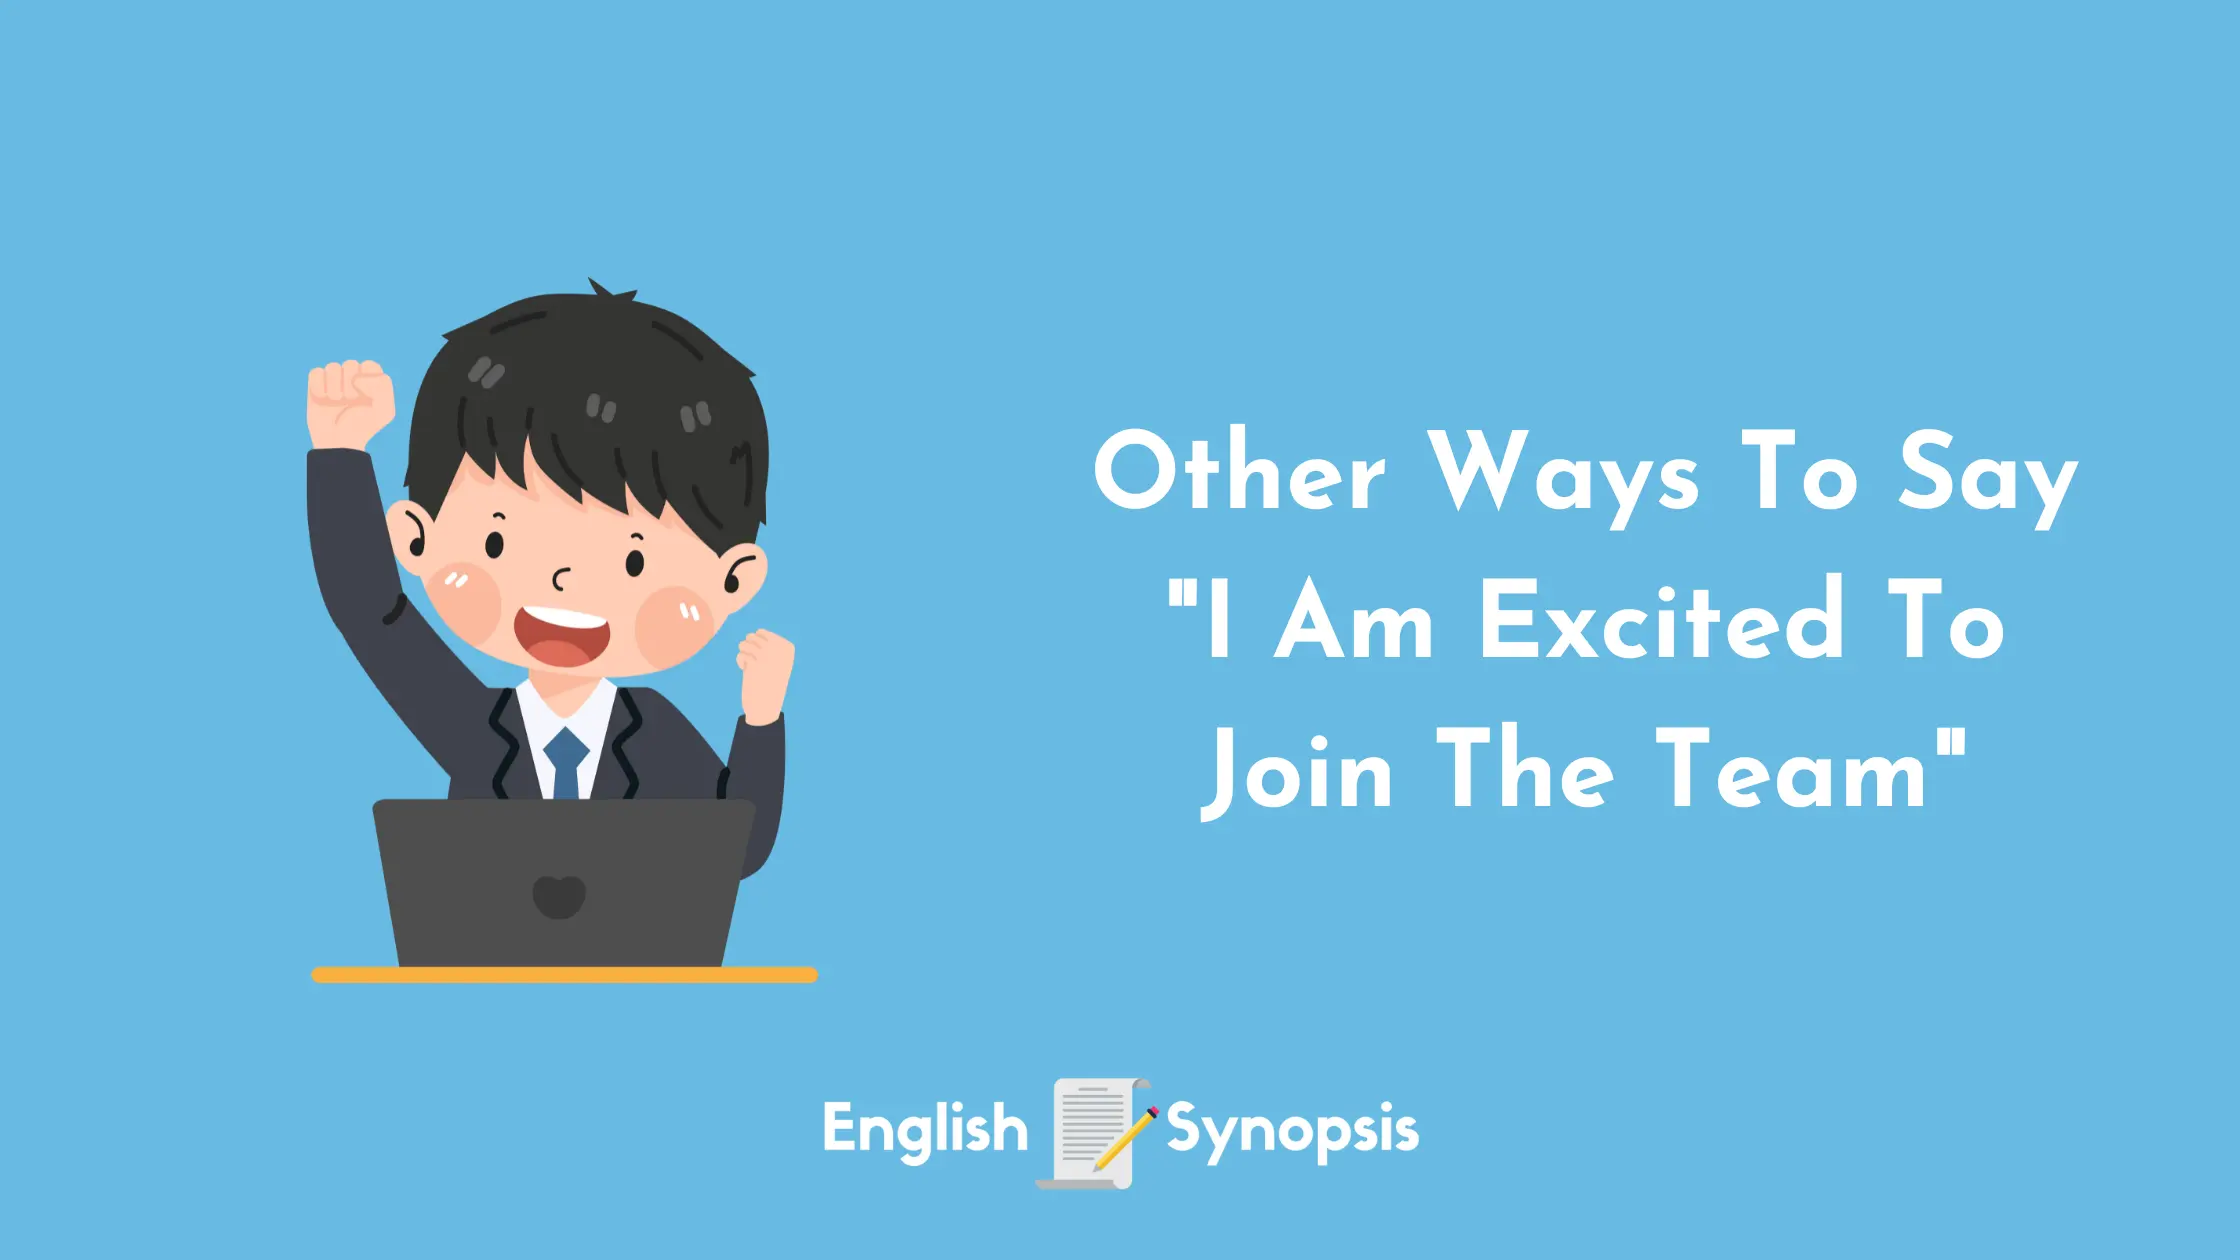 Other Ways To Say "I Am Excited To Join The Team"